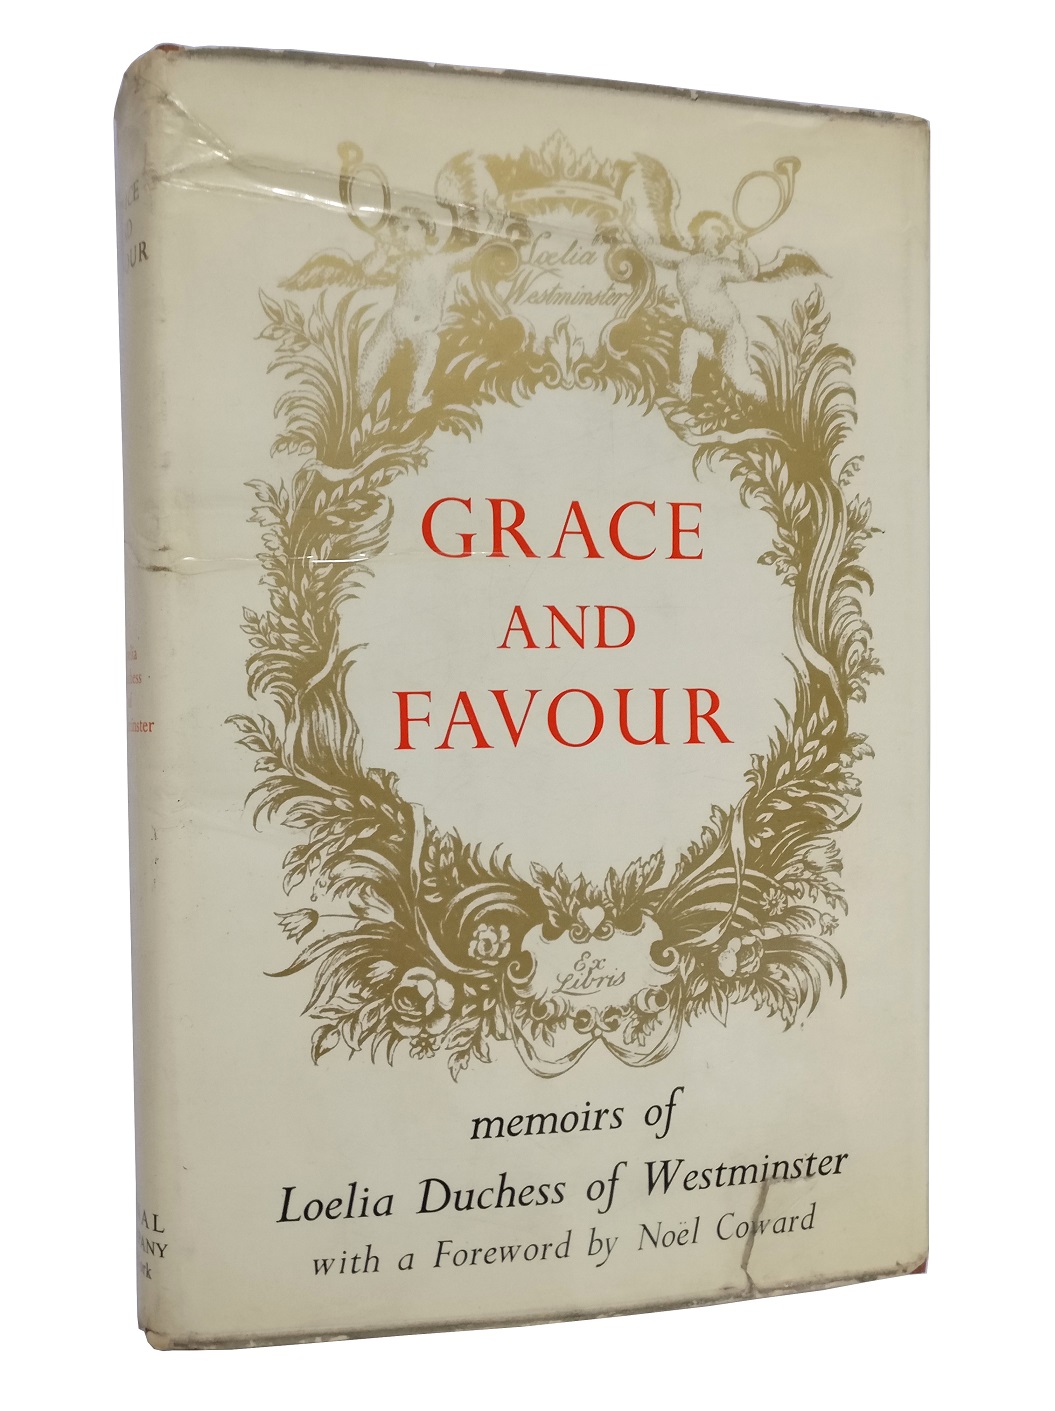 Grace and Favour. The Memoirs of Loelia, Duchess of Westminster